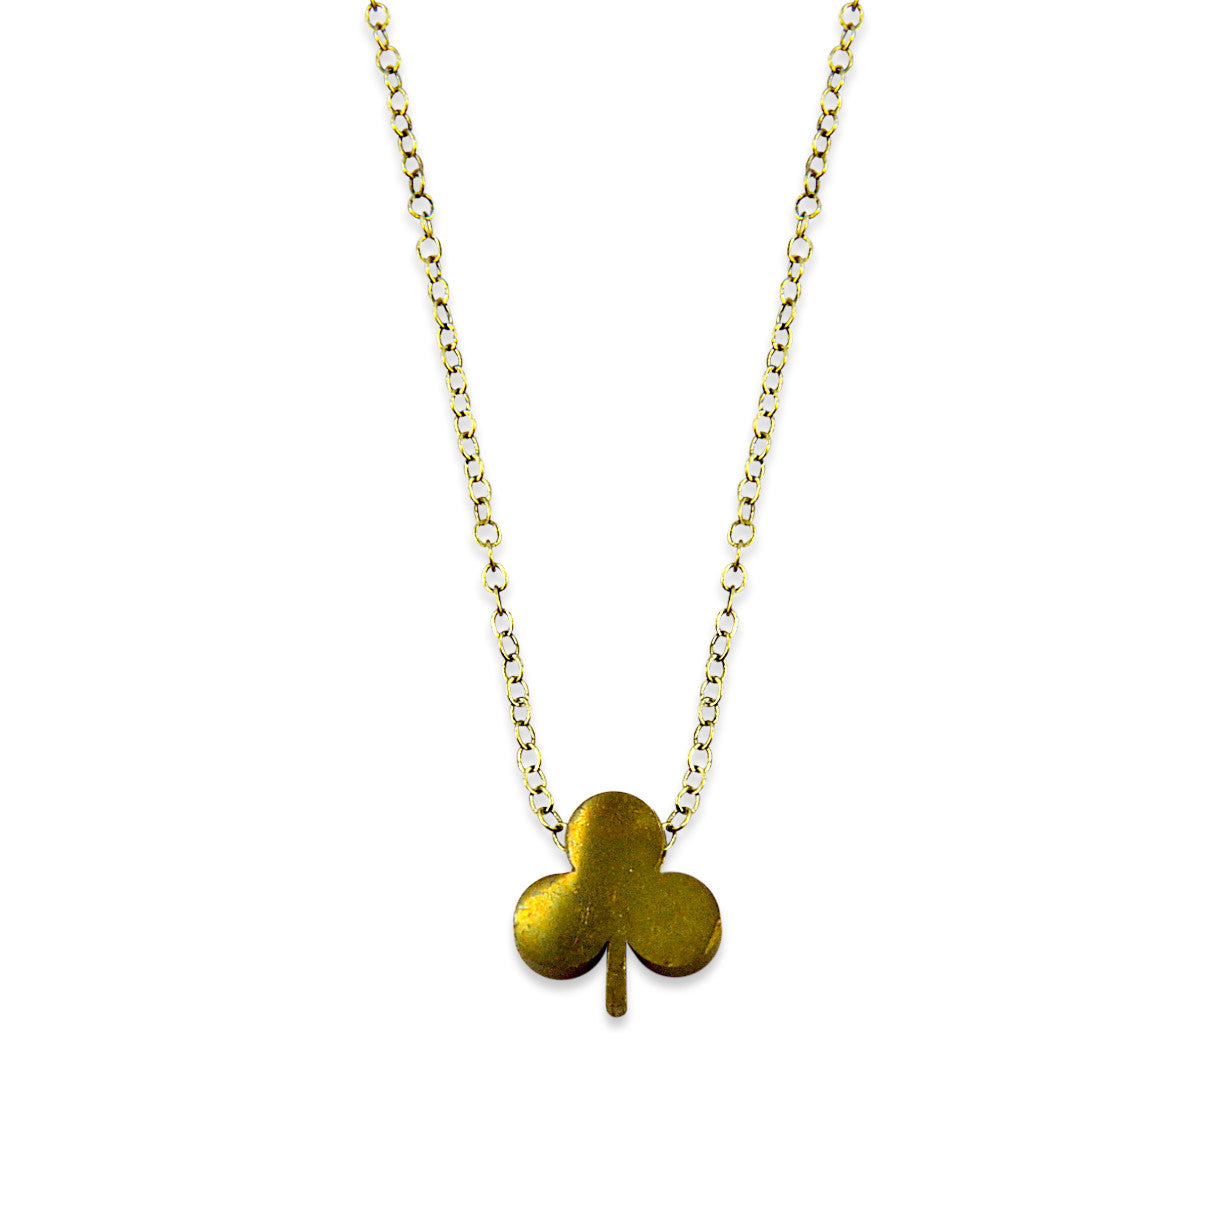 Tiny Lucky Clover Necklace - Gwen Delicious Jewelry Designs